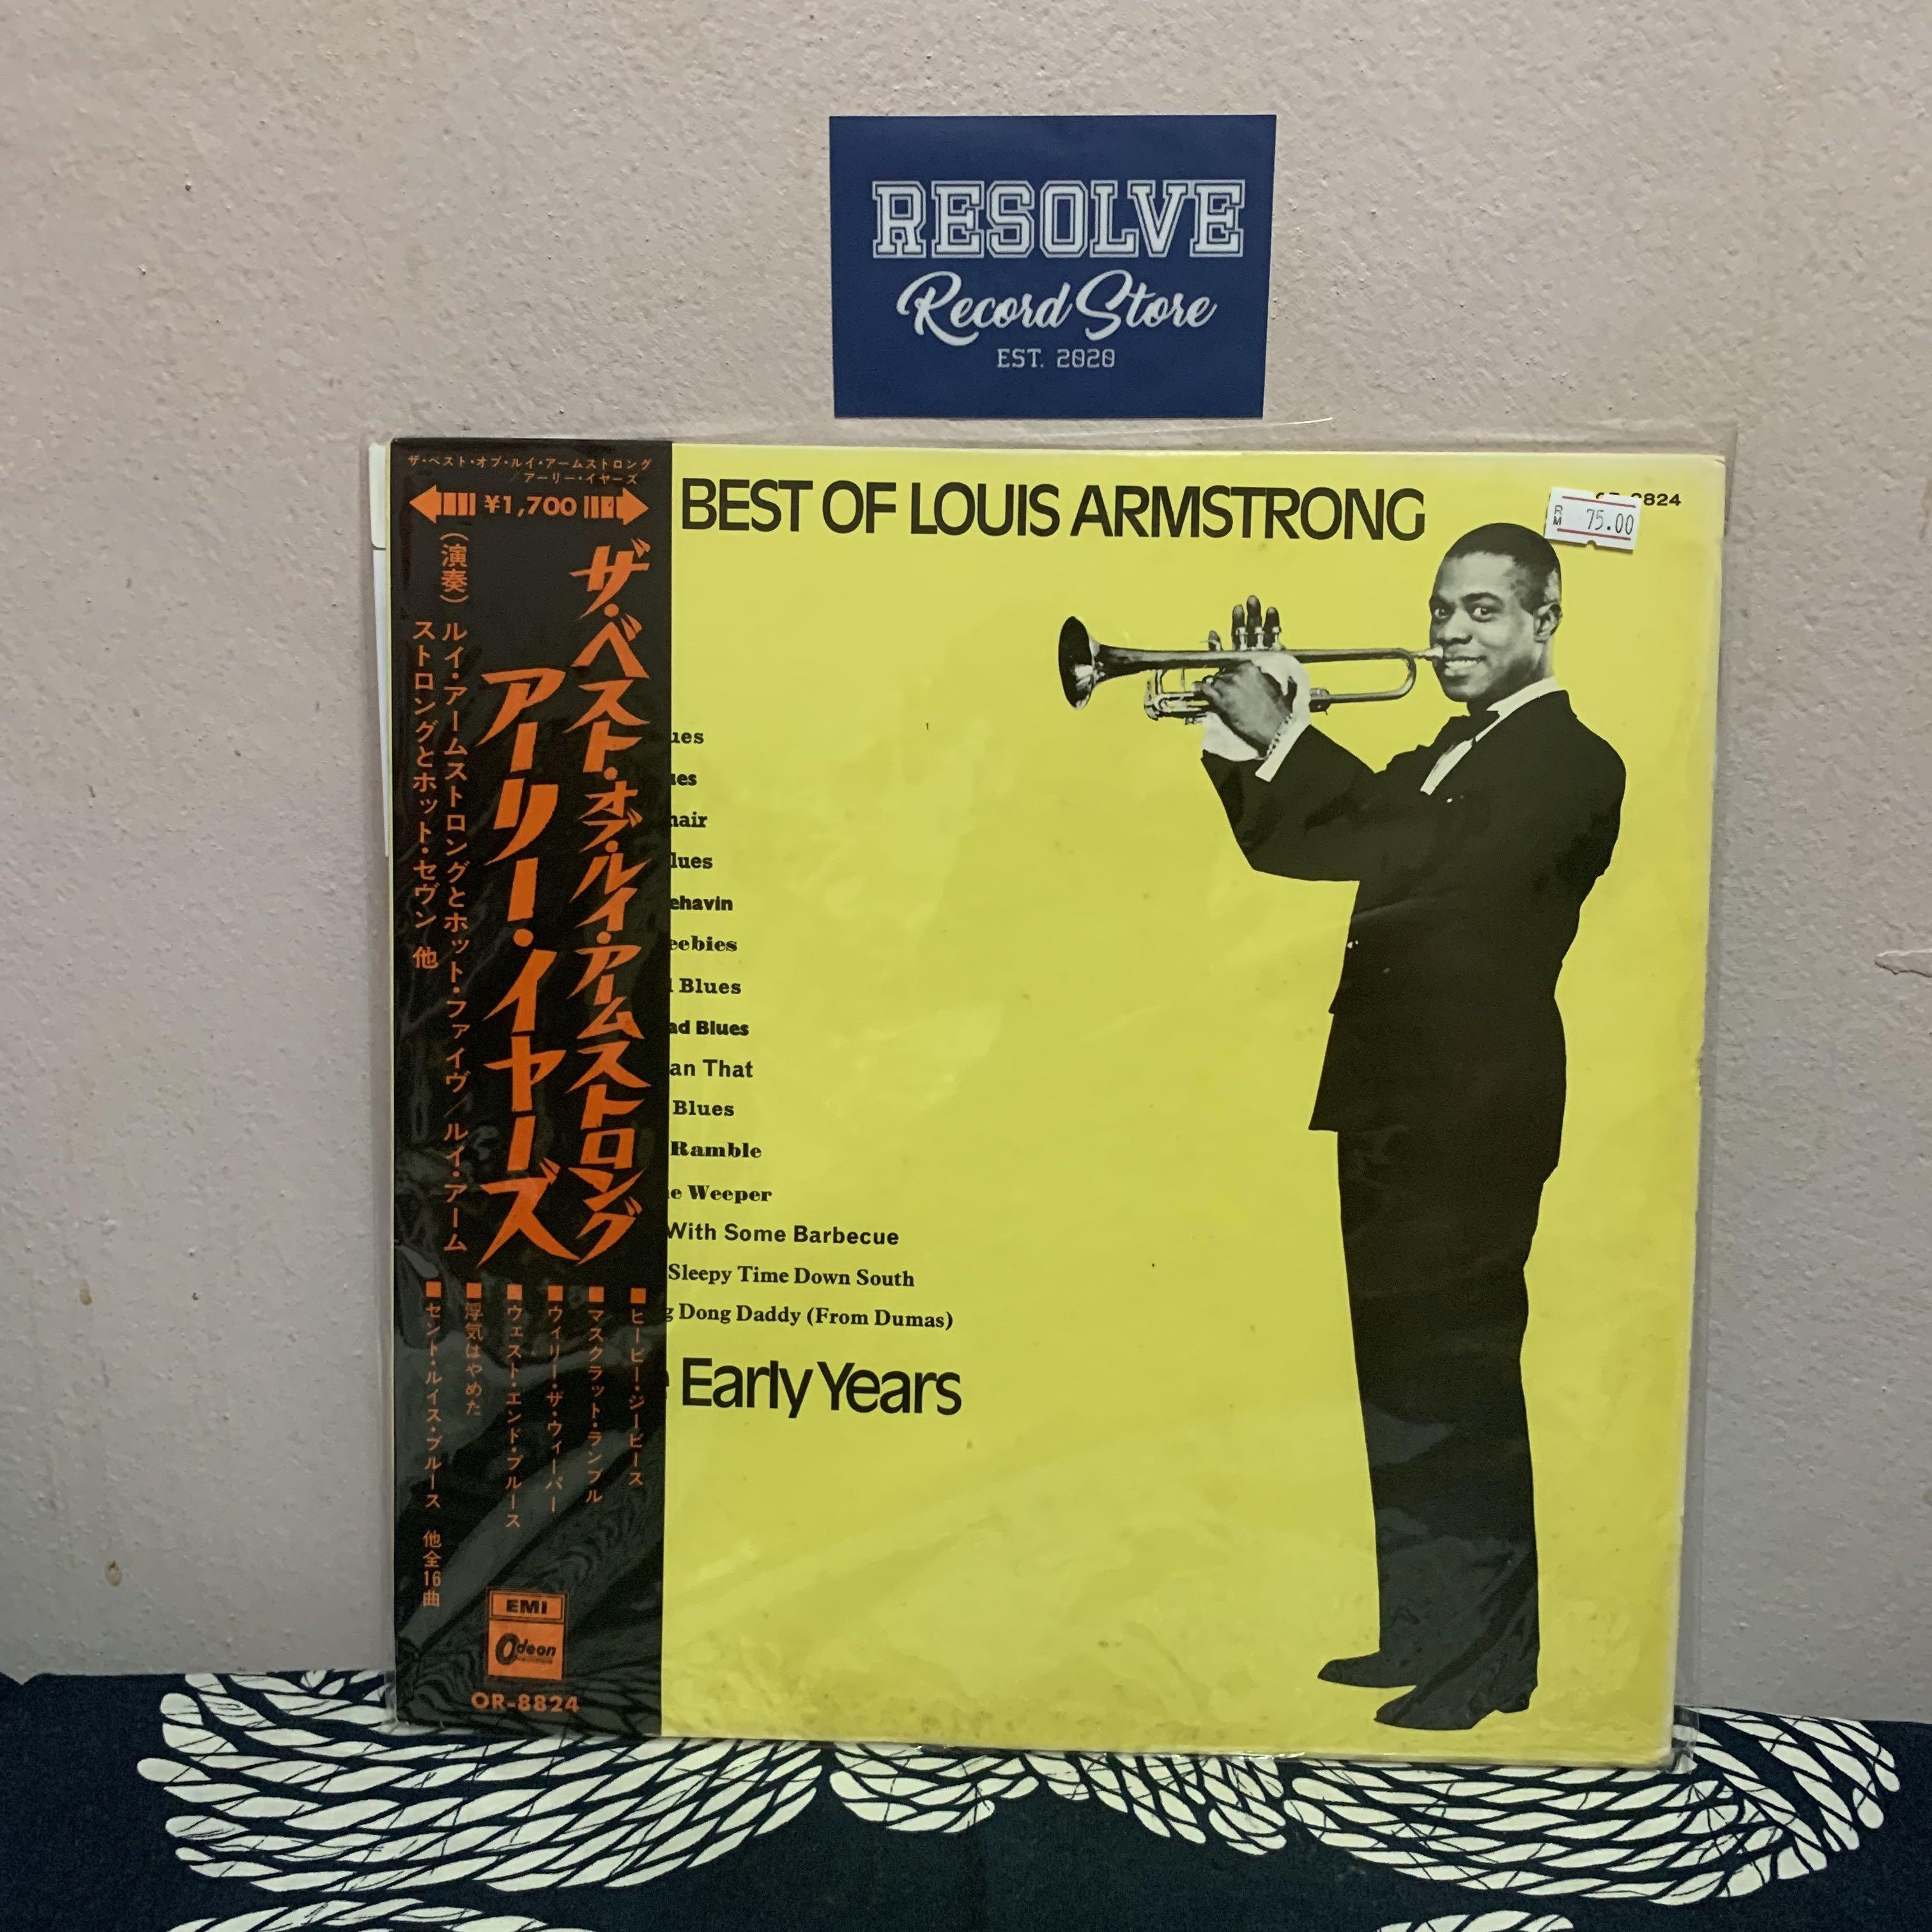 Armstrong,Louis - The Very Best Of (180G Vinyl) -  Music